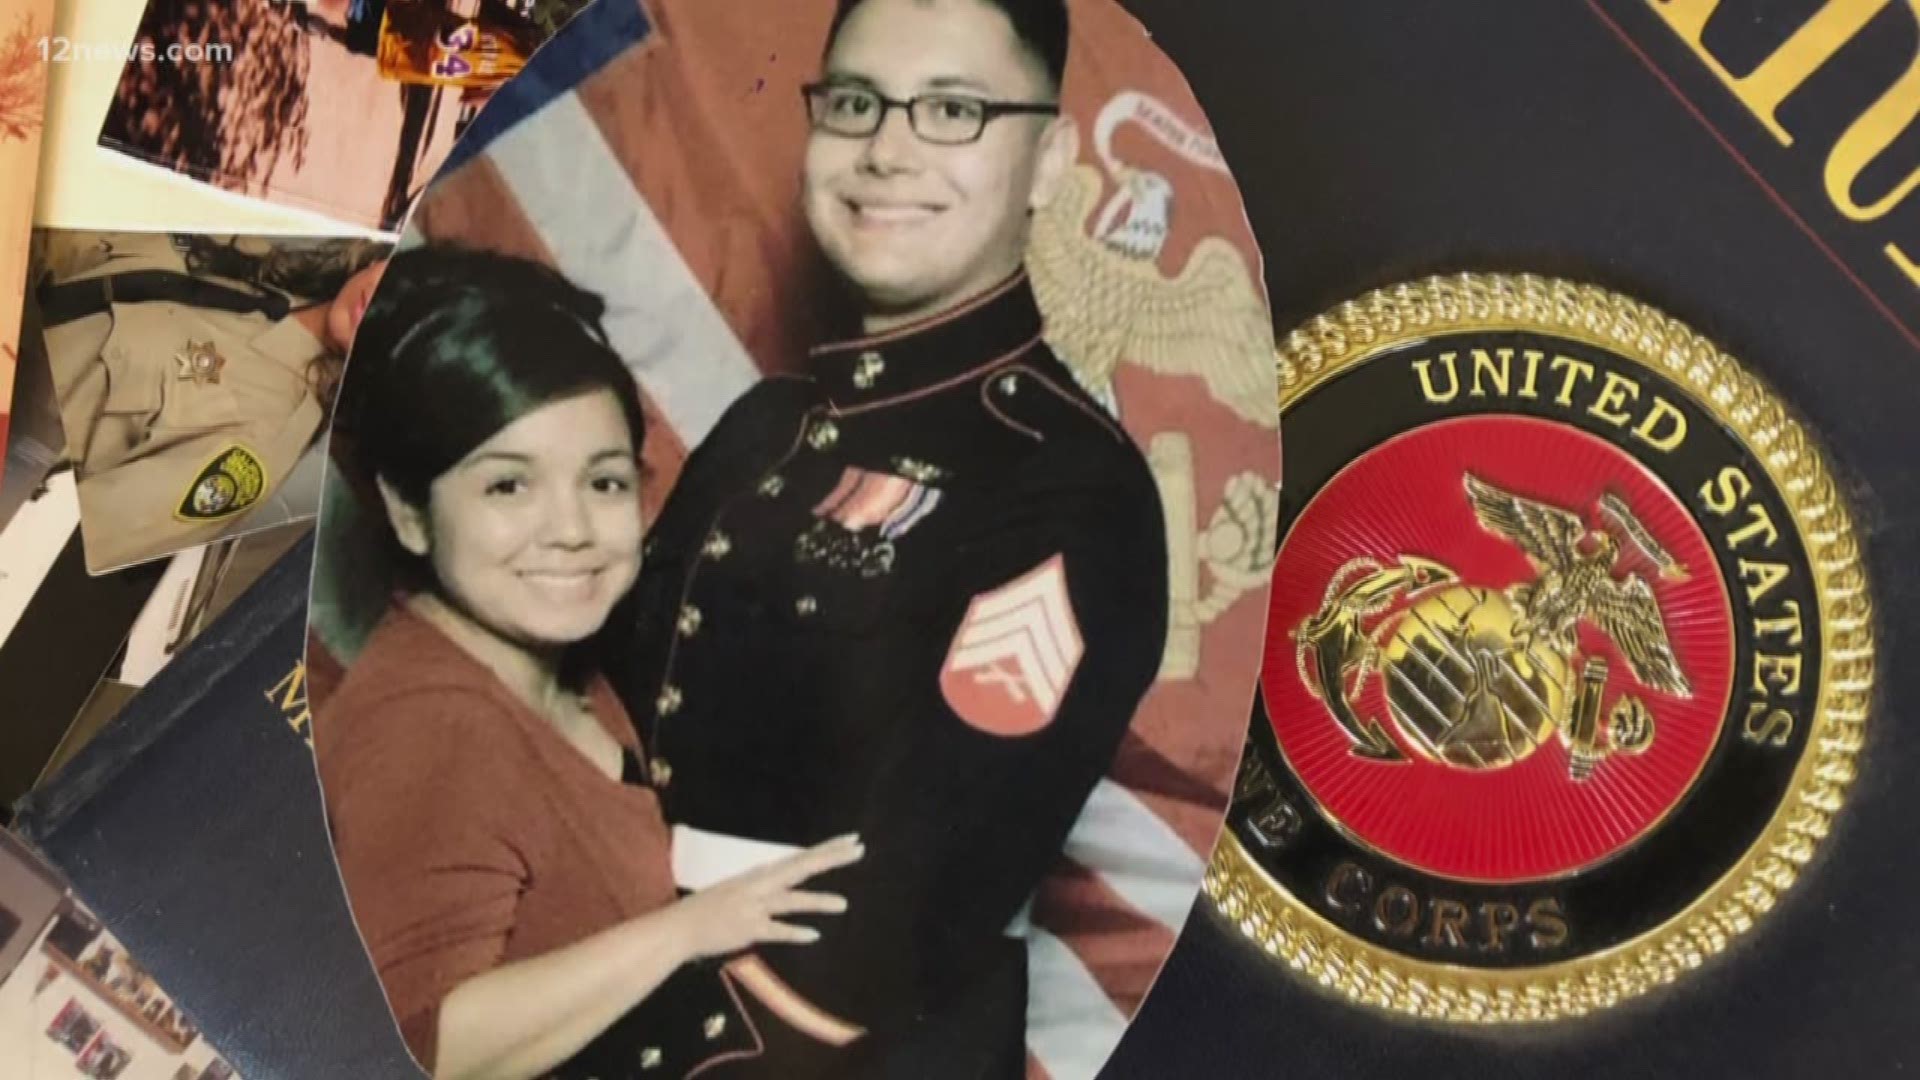 In the search of a West Valley Marine gone missing, Maximo Flores and four other Marines have now been confirmed dead.